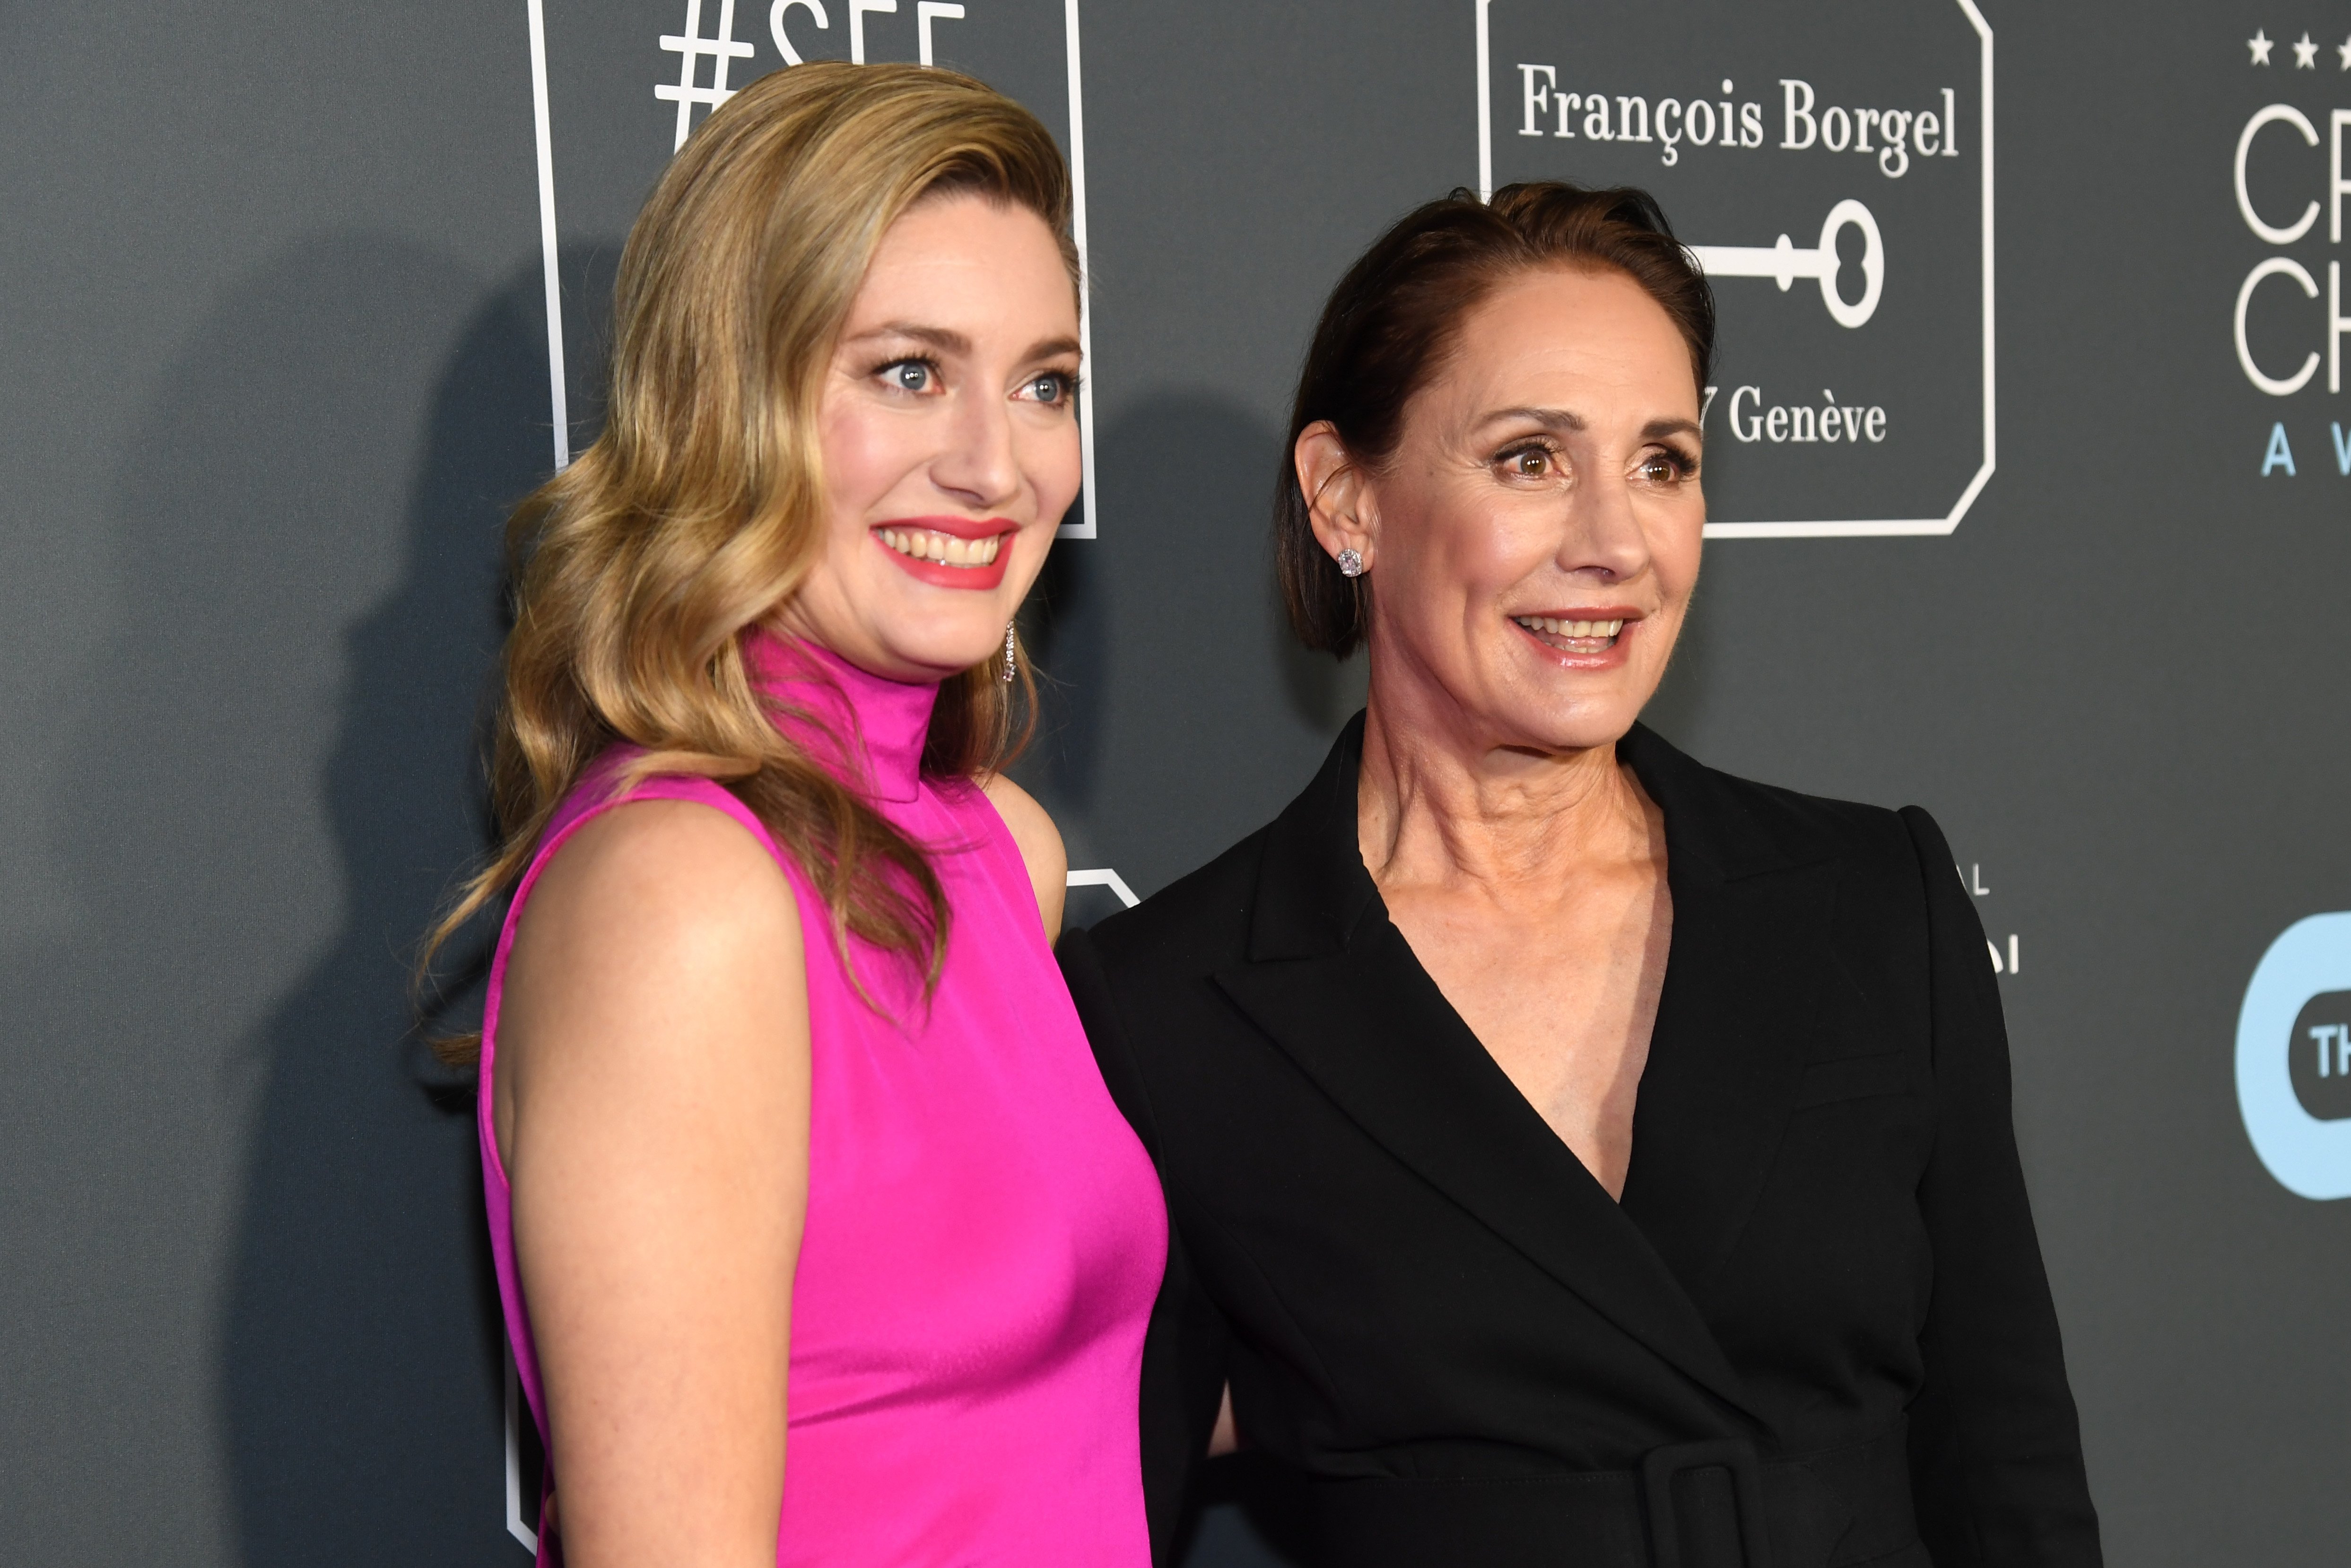 Zoe Perry and Laurie Metcalf attend the 24th annual Critics' Choice Awards at Barker Hangar on January 13, 2019, in Santa Monica, California. | Source: Getty Images